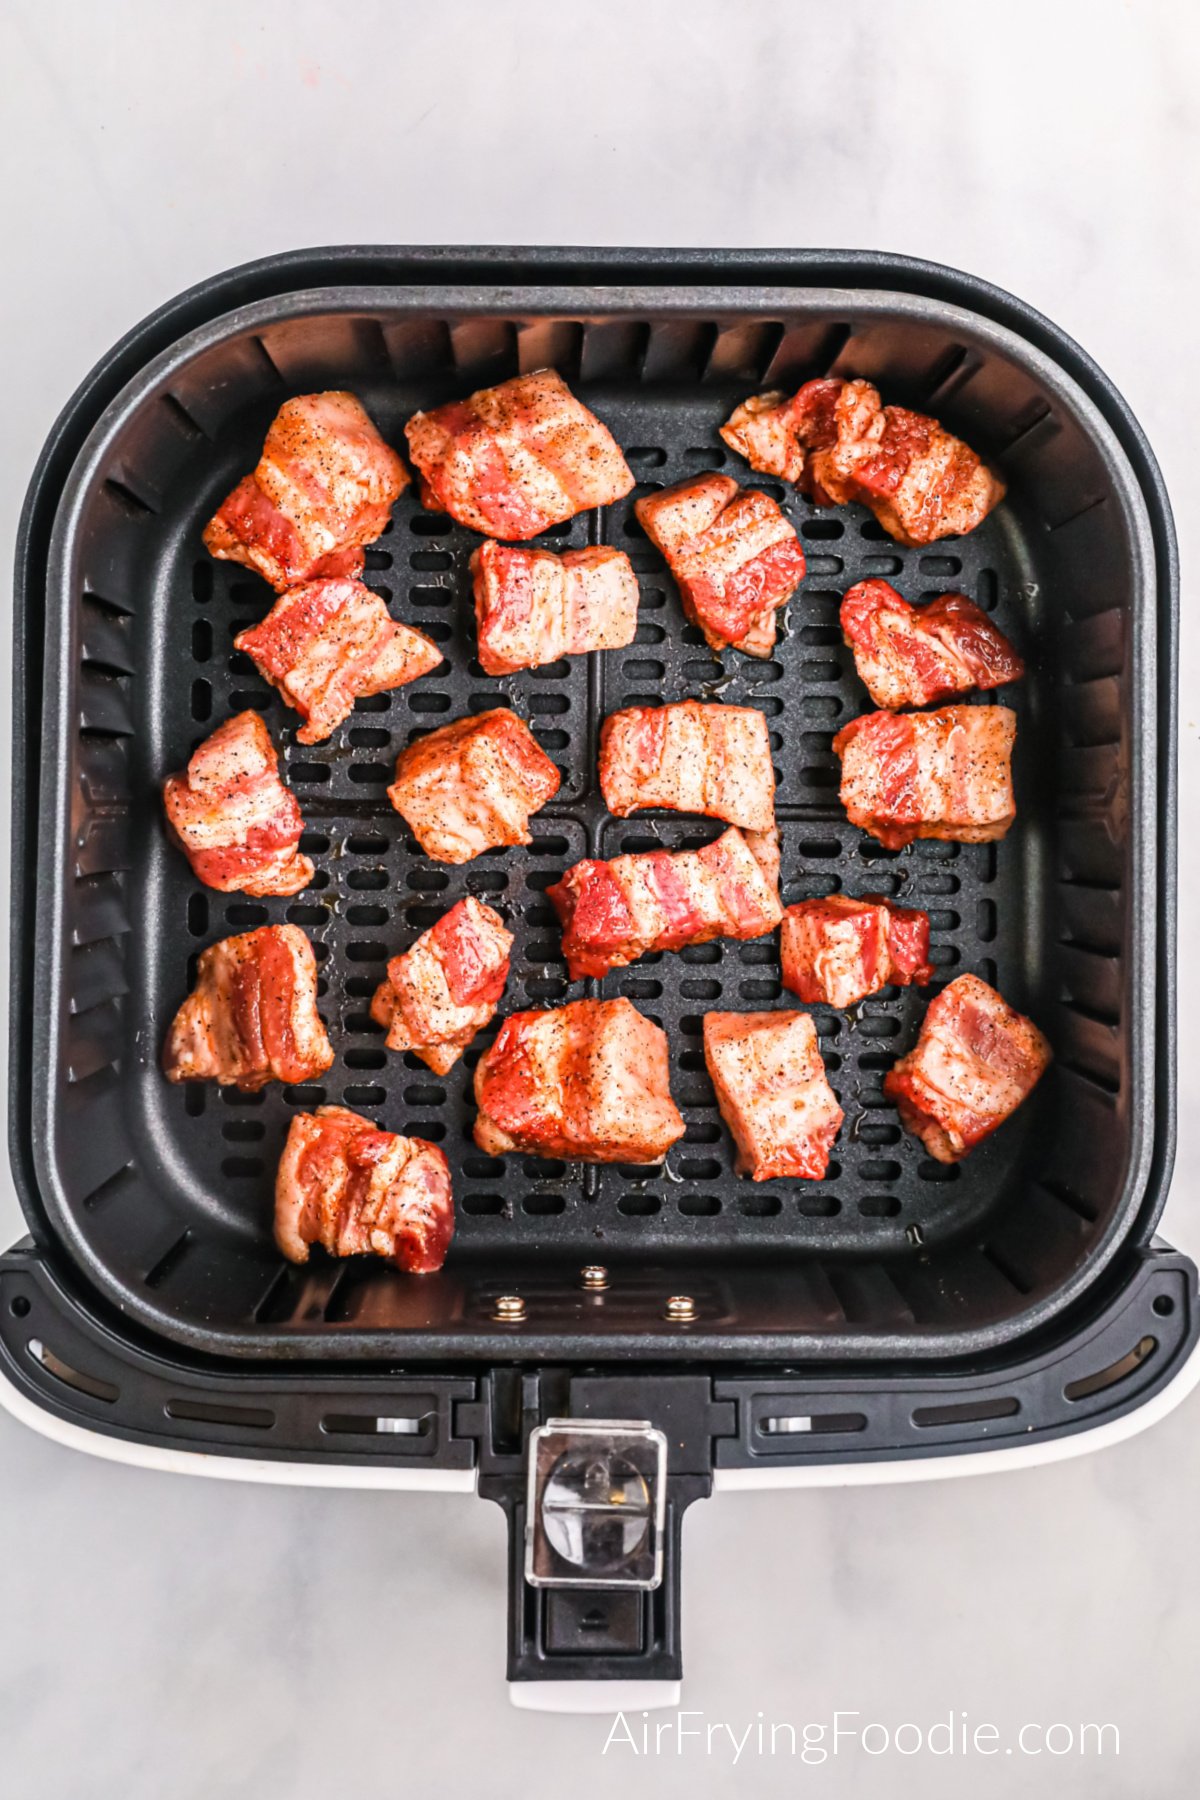 Pork belly bites in the basket of the air fryer, ready to cook.